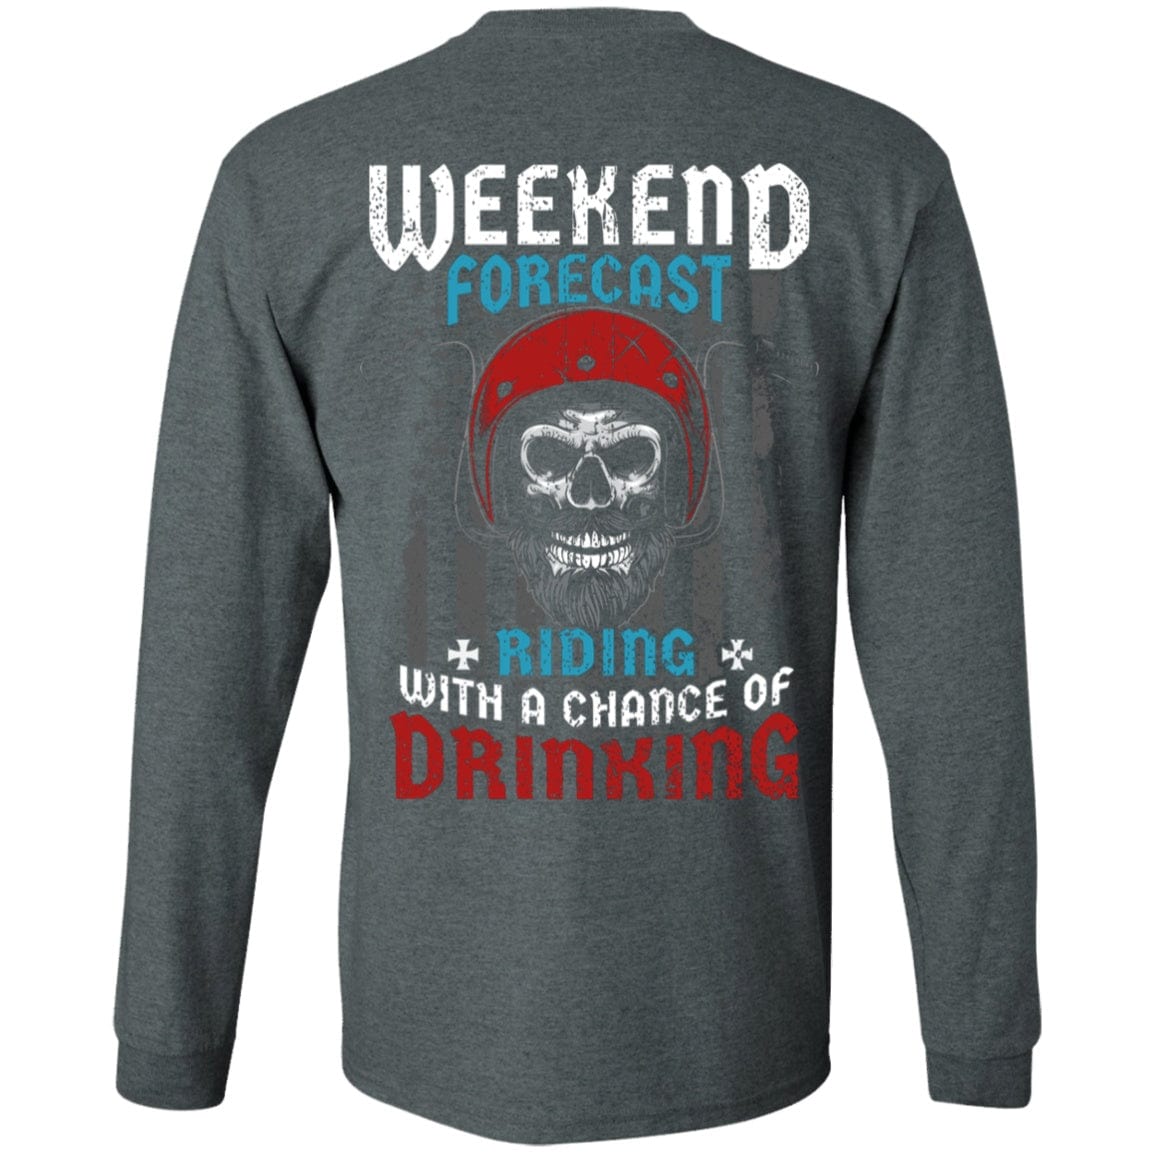 Weekend Forecast Riding With a Chance of Drinking Shirt